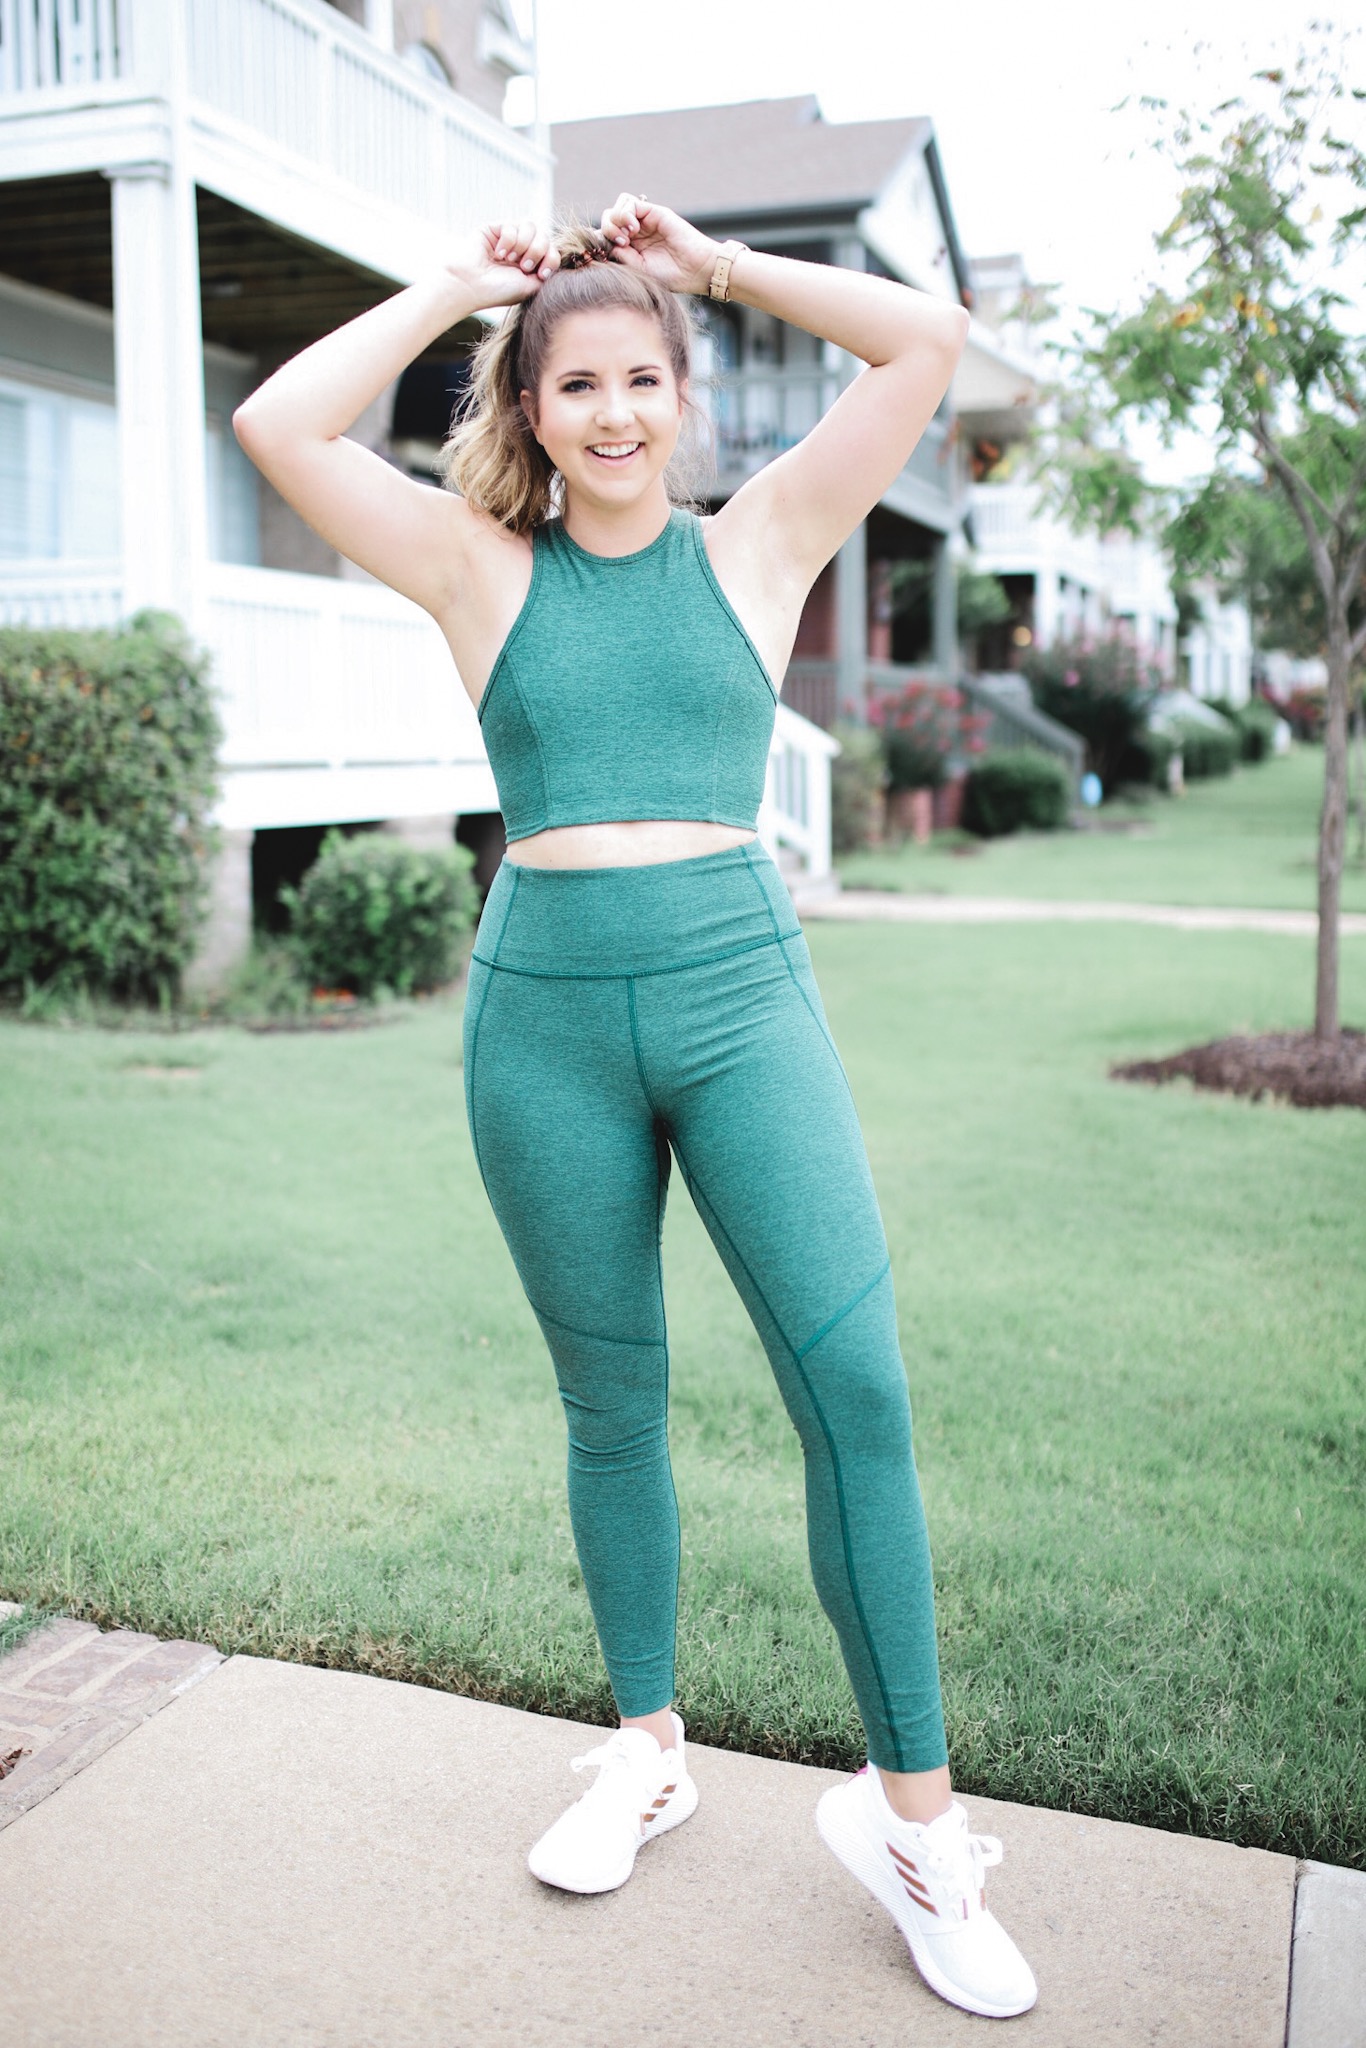 3 Reasons Why Outdoor Voices Leggings Are Worth the Investment - Sunshine  Style